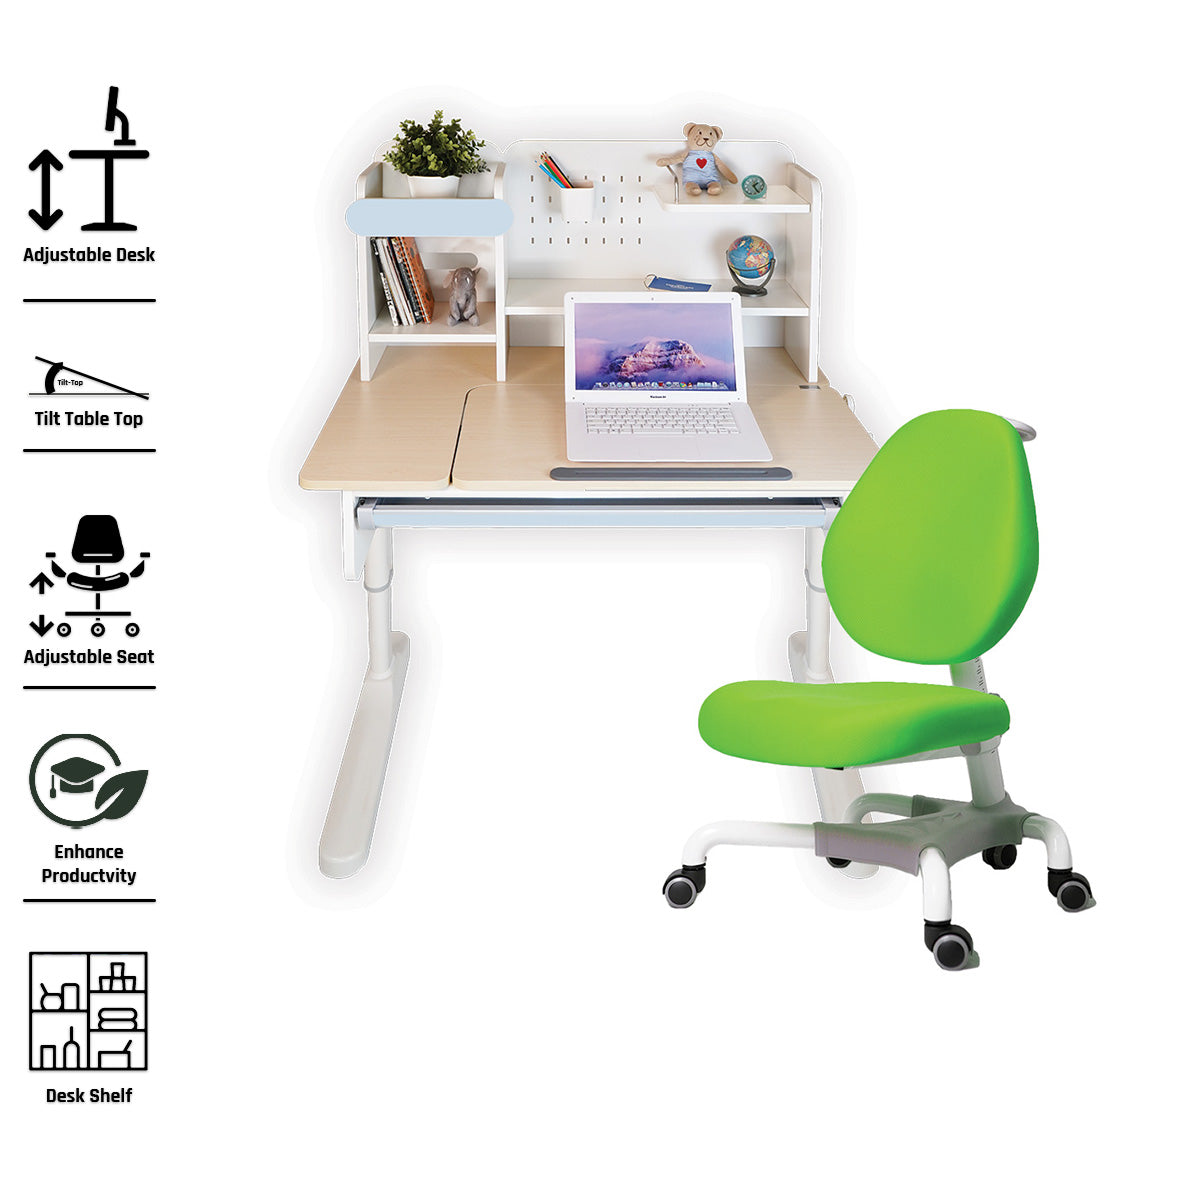 Impact Ergo-Growing Study Desk And Chair Set 1000mm x 650mm, IM-G1000A-BL (Ready Stocks)